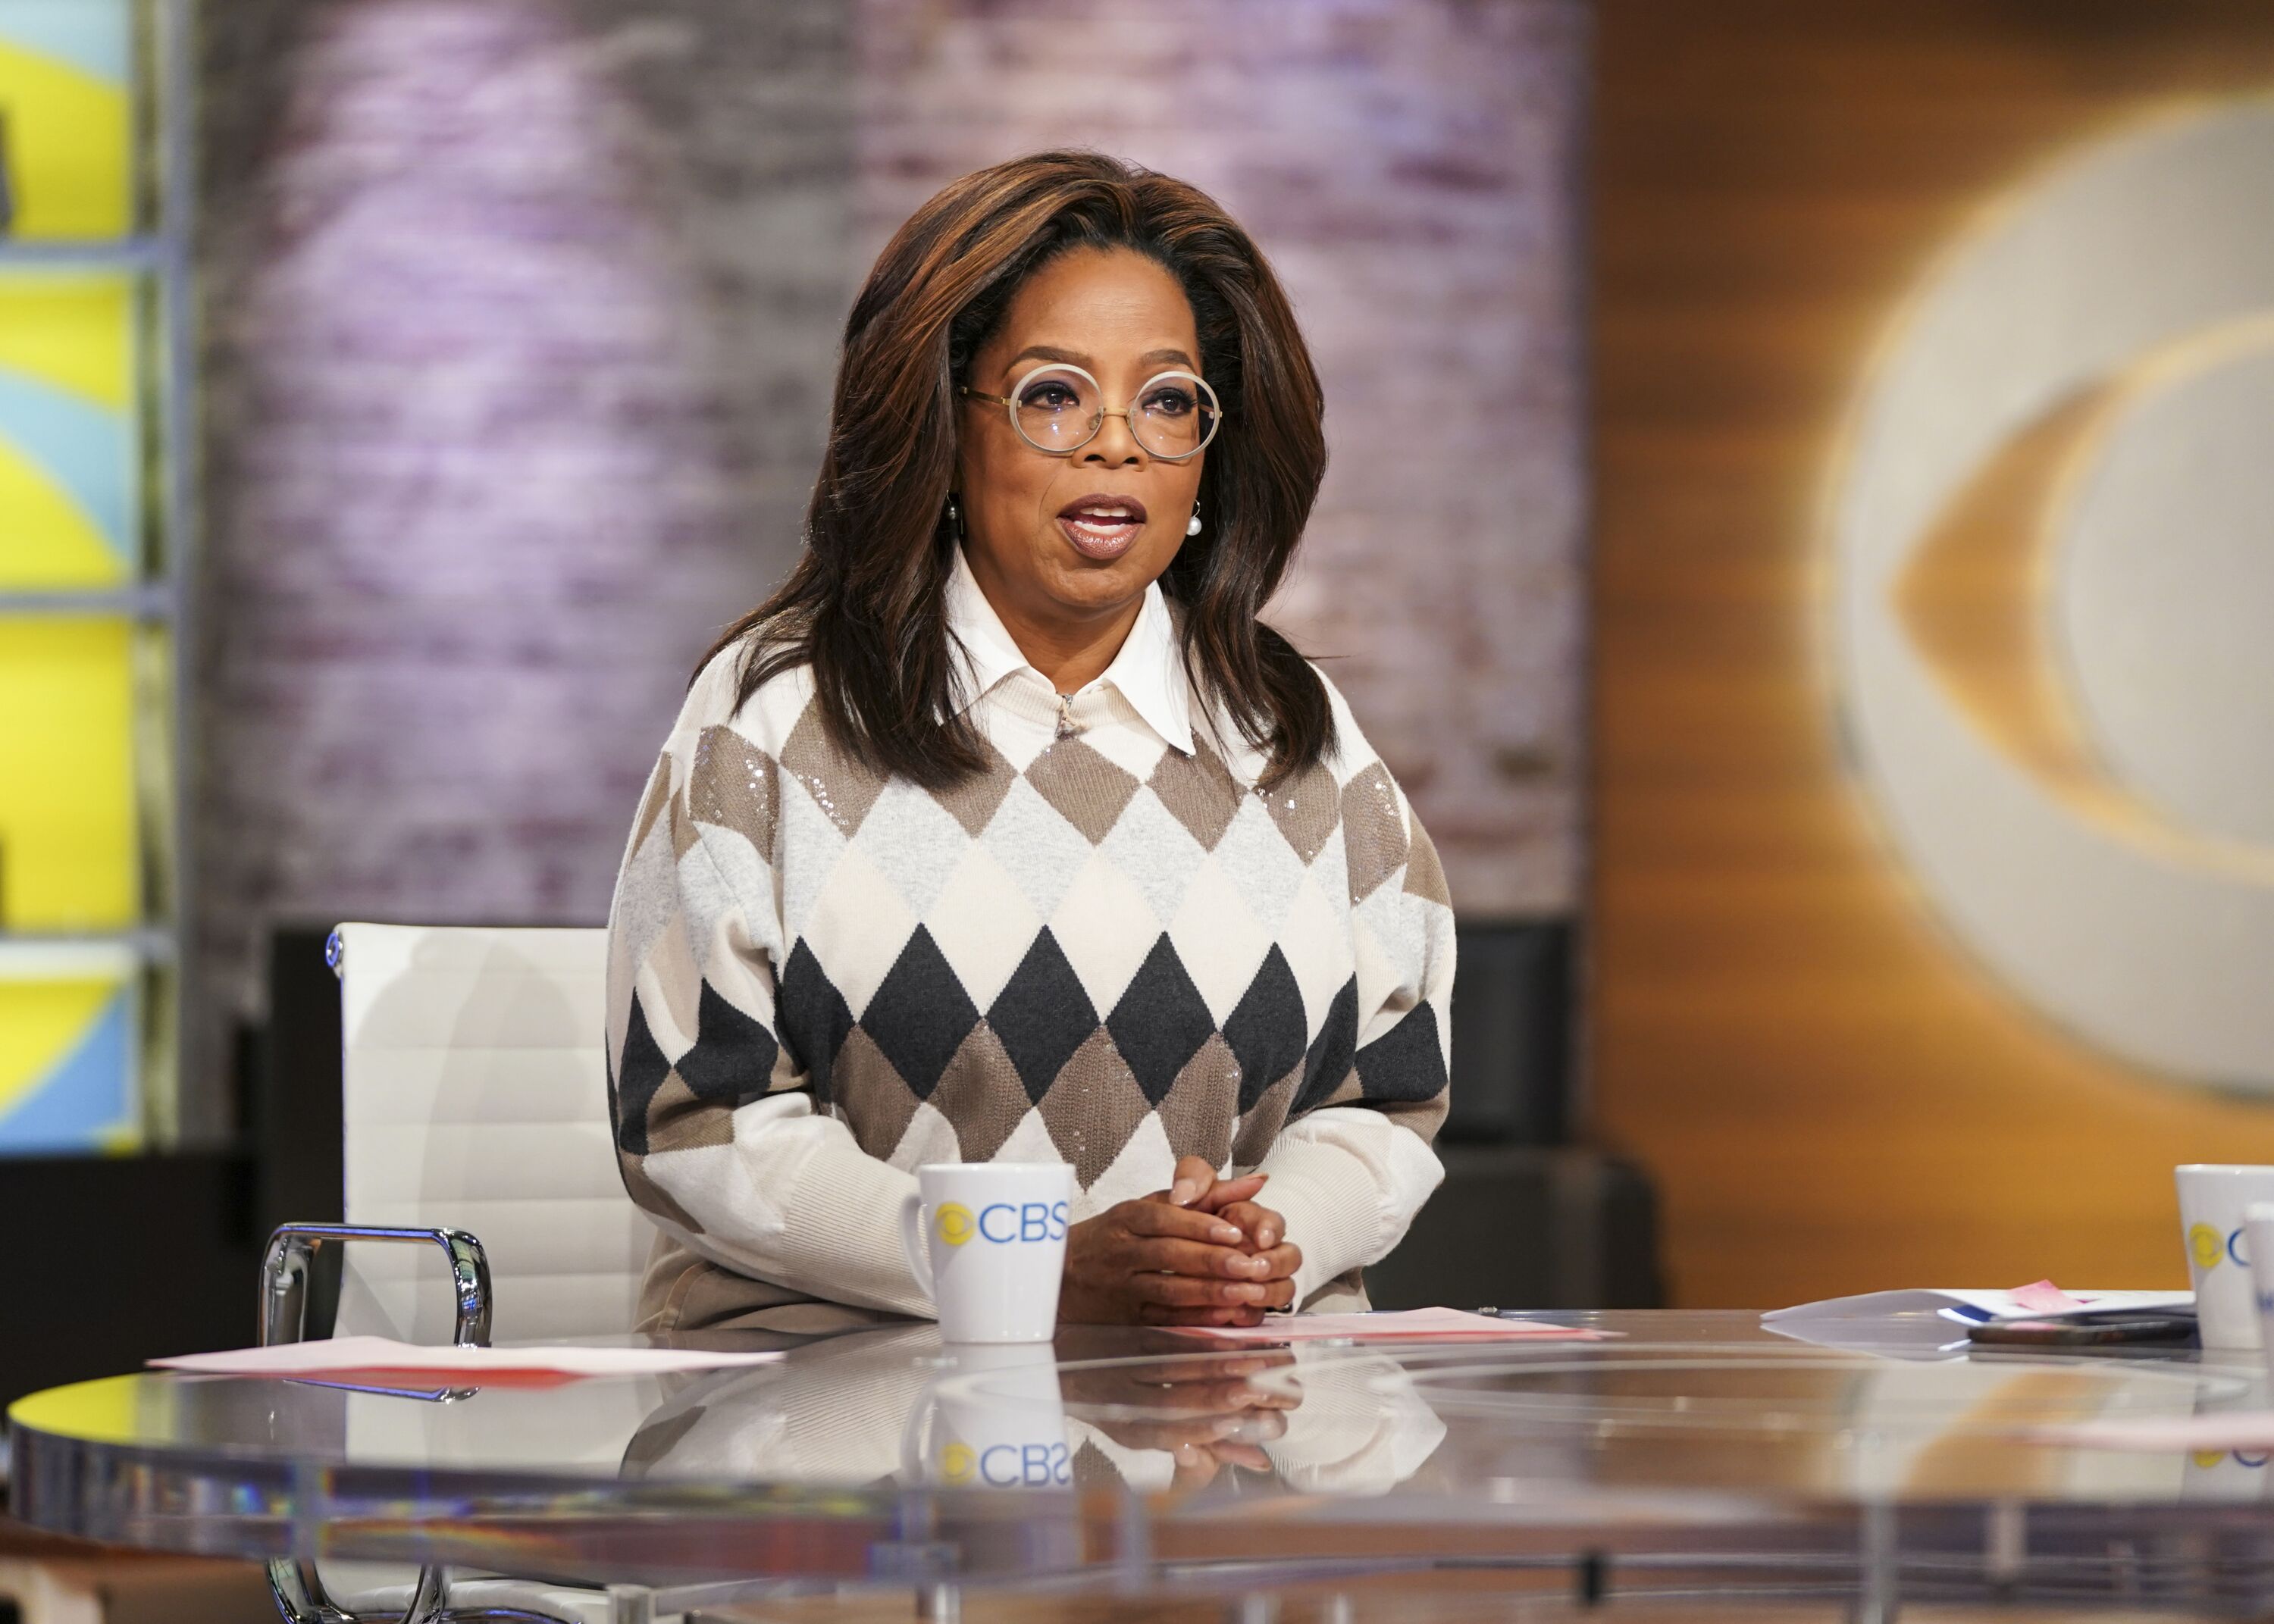 Oprah Winfrey being interviewed on "CBS This Morning" about her new Book Club Selection, "Olive, Again" on November 7, 2019 | Photo: Michele Crowe/CBS via Getty Images